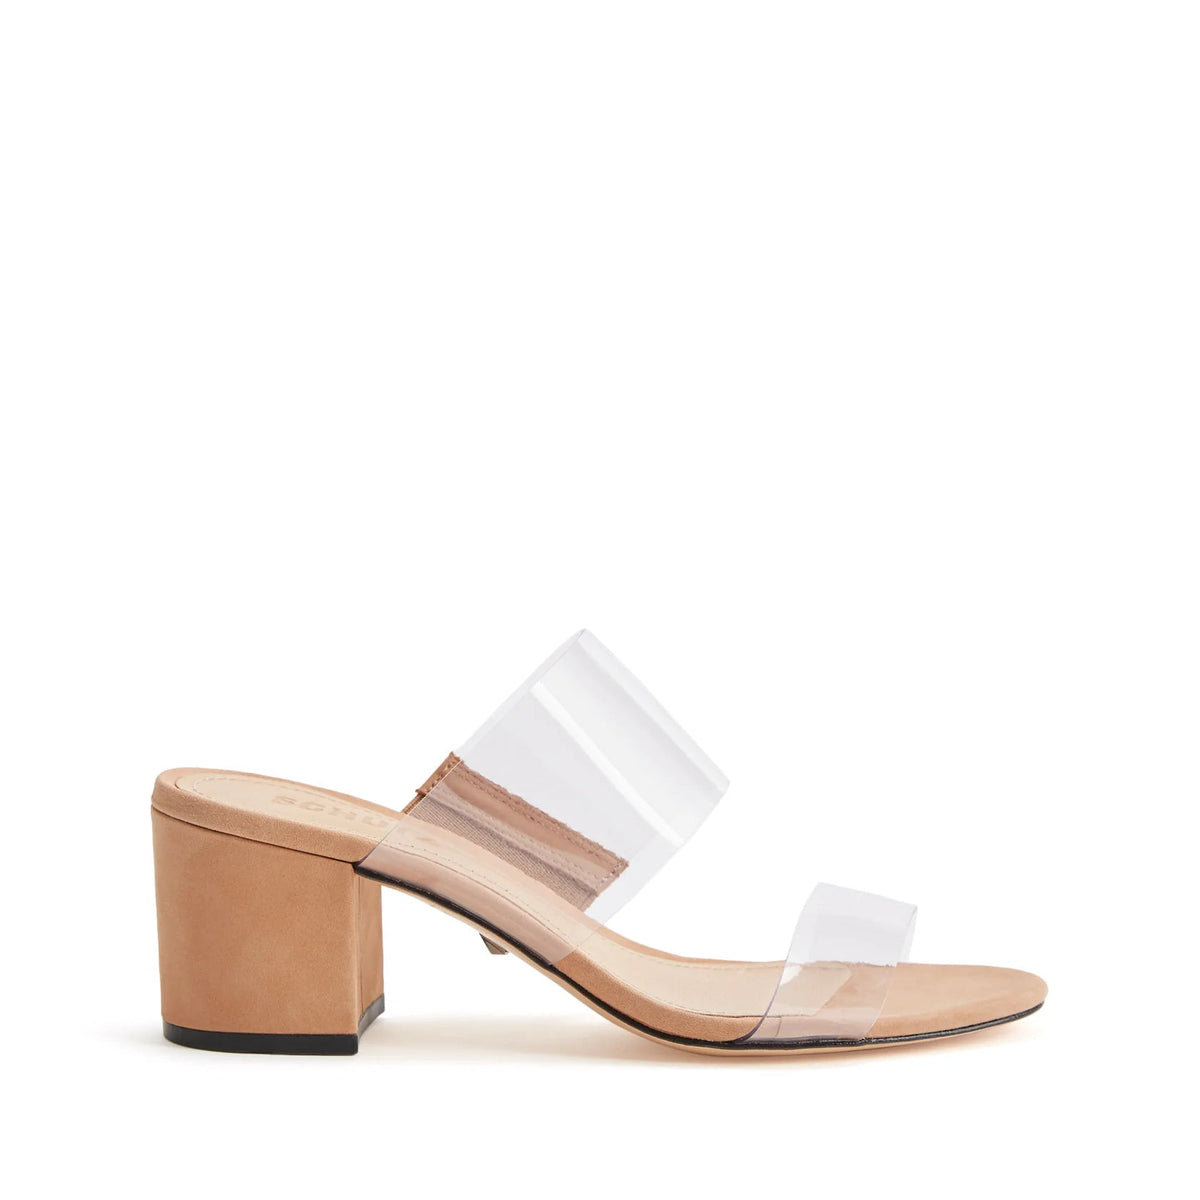 Victorie Sandal - Styled With Claire SCHUTZ